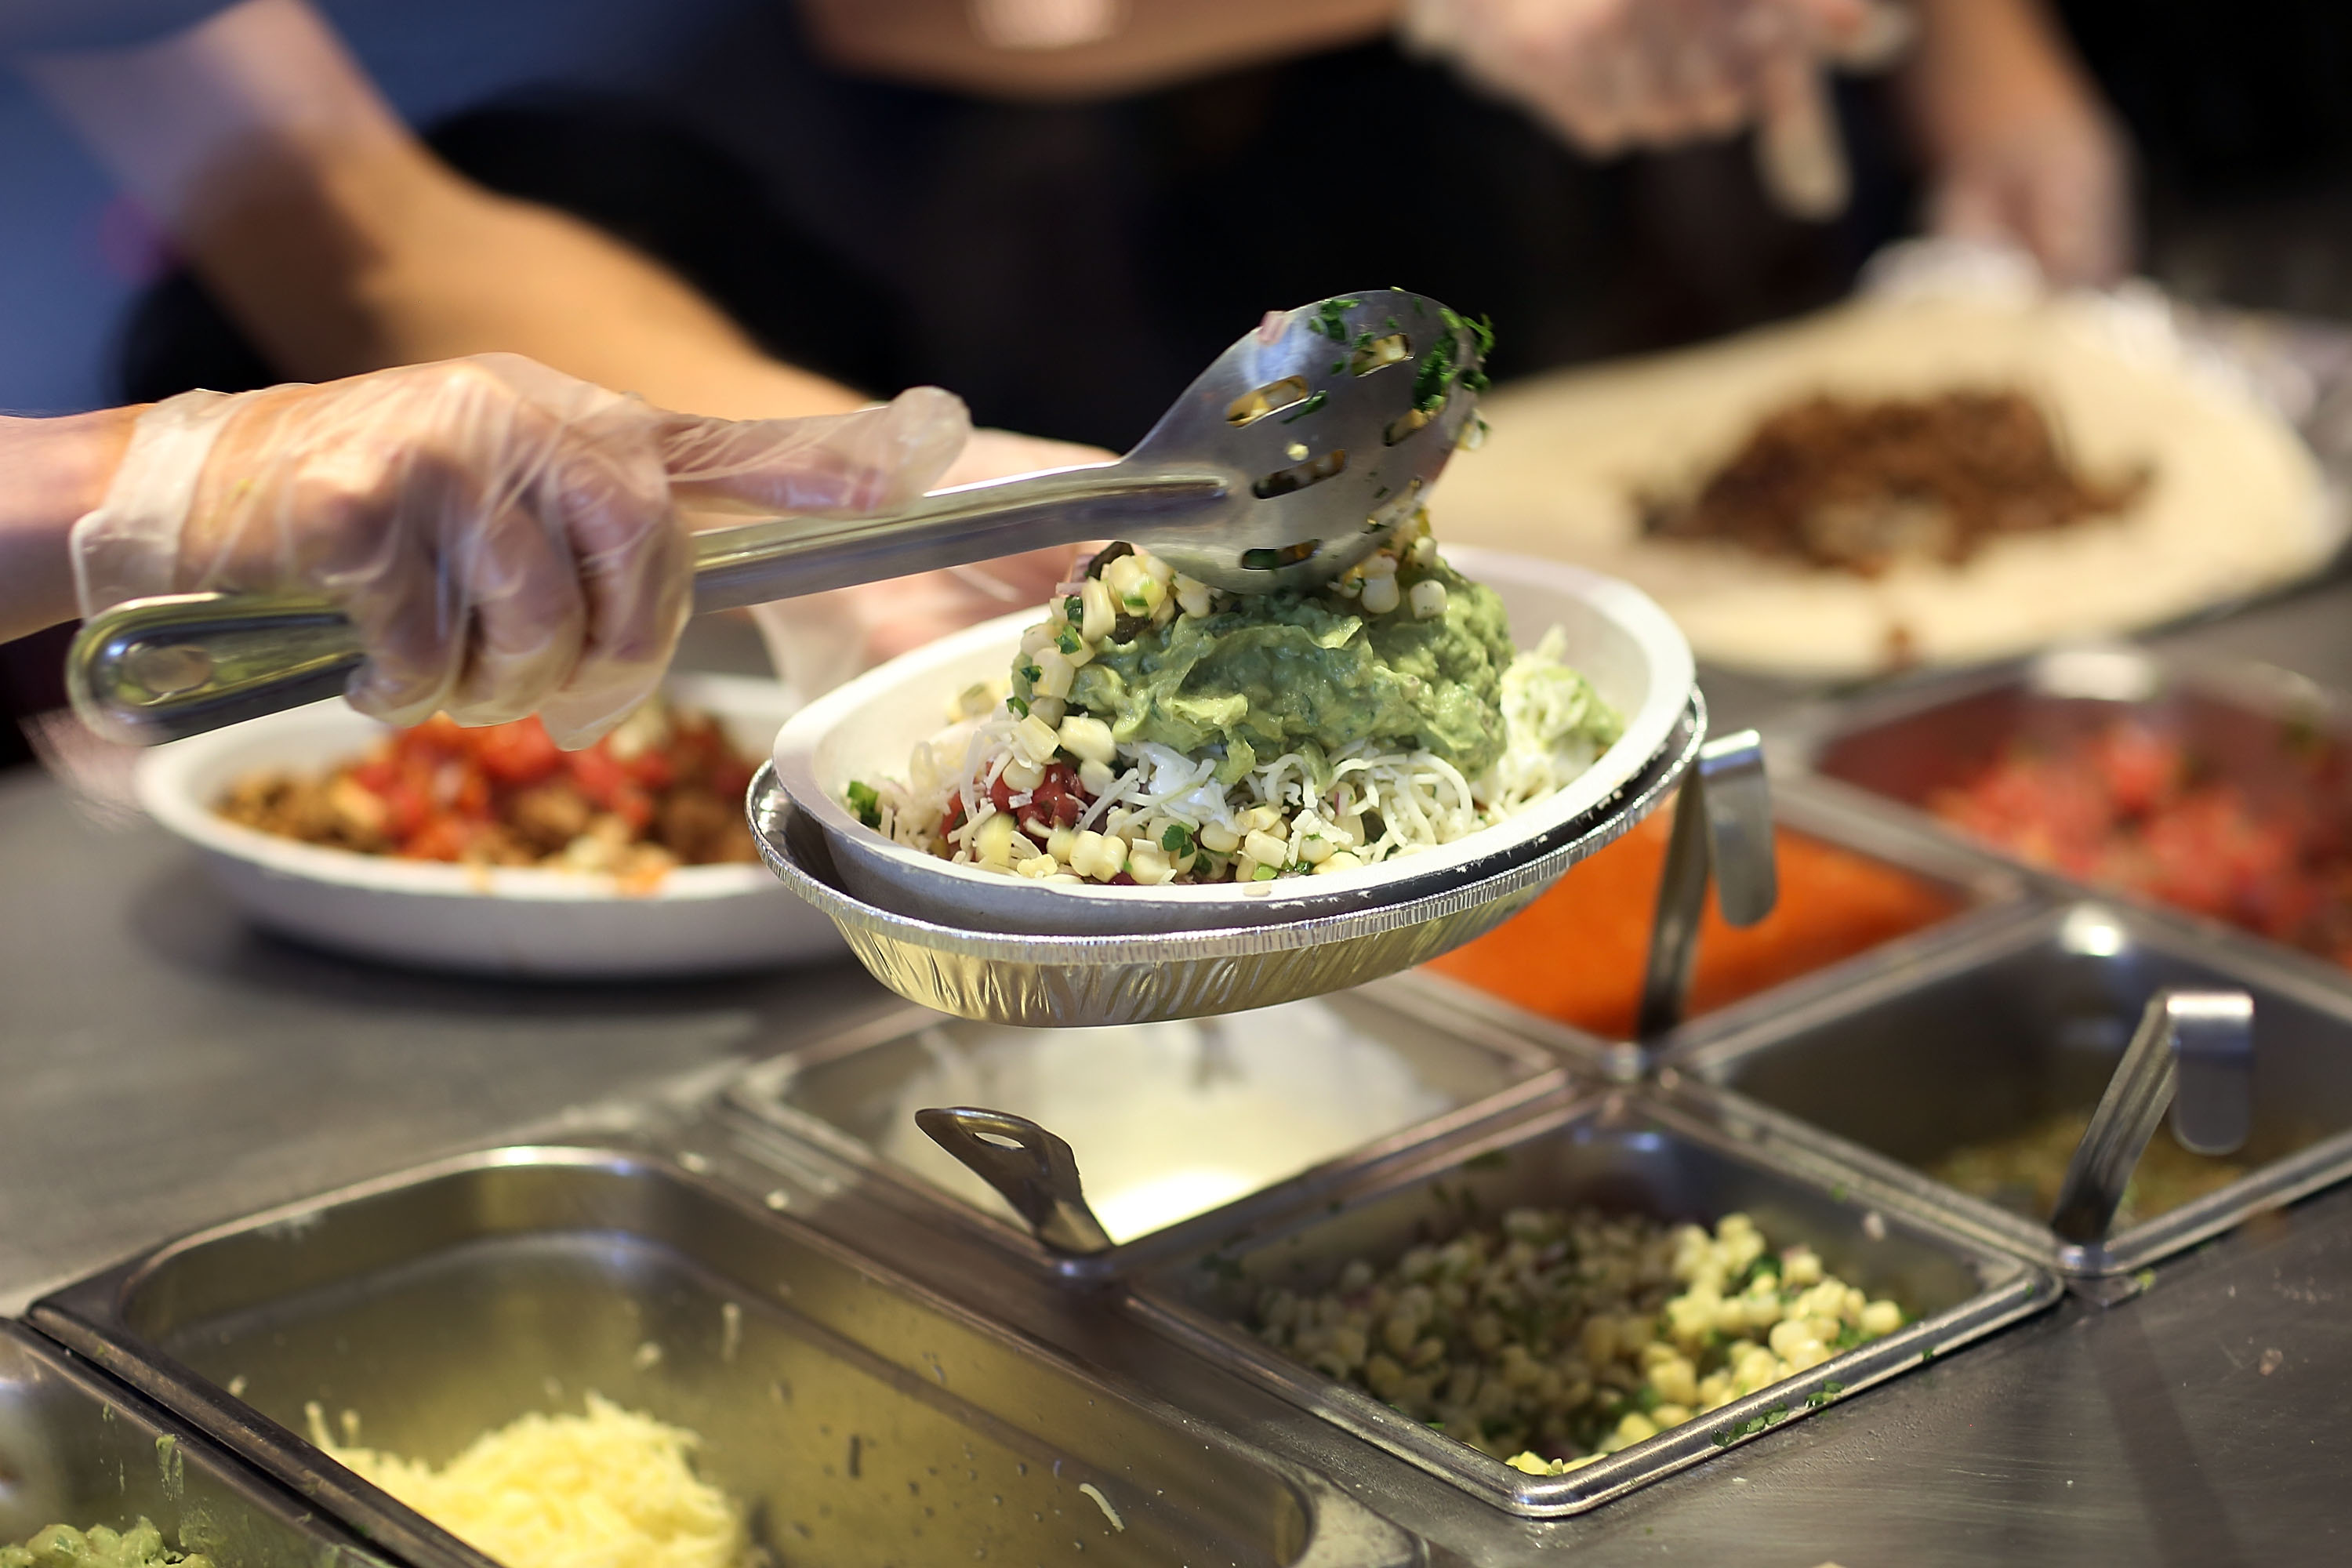 Chipotle restaurant workers fill orders for customers on the day that the company announced it will only use non-GMO ingredients in its food on April 27, 2015 in Miami, Florida. (Photo by Joe Raedle/Getty Images)